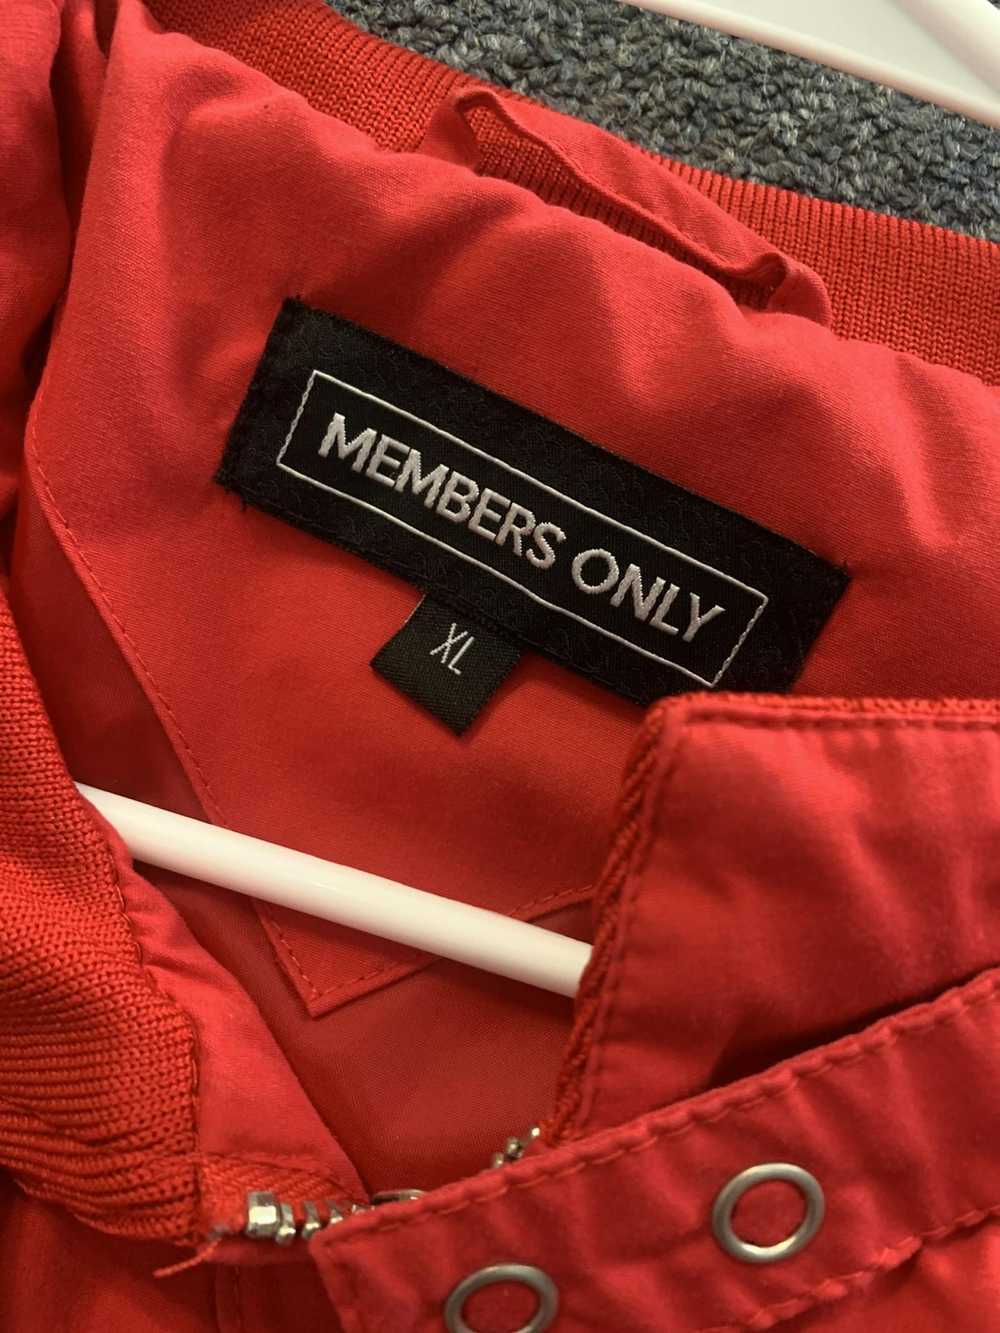 Members Only Vintage Members Only Jacket Red Cafe… - image 2